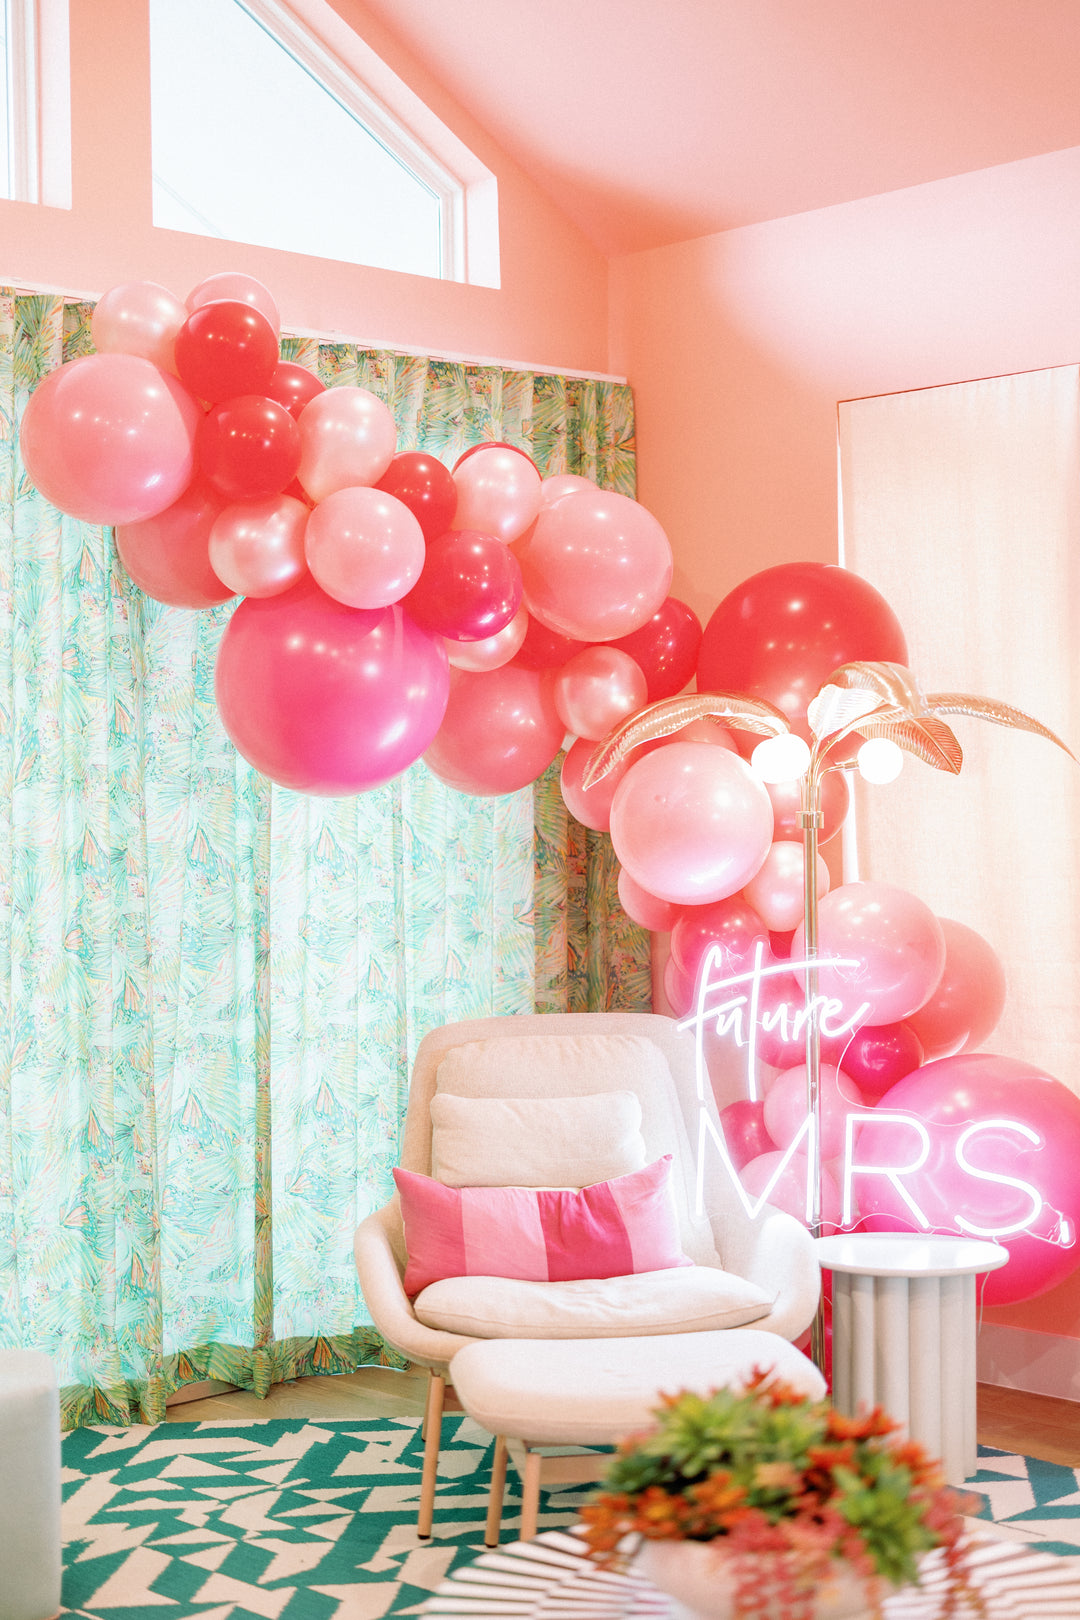 Bachelorette Party Decorations That Are Cool Girl Approved